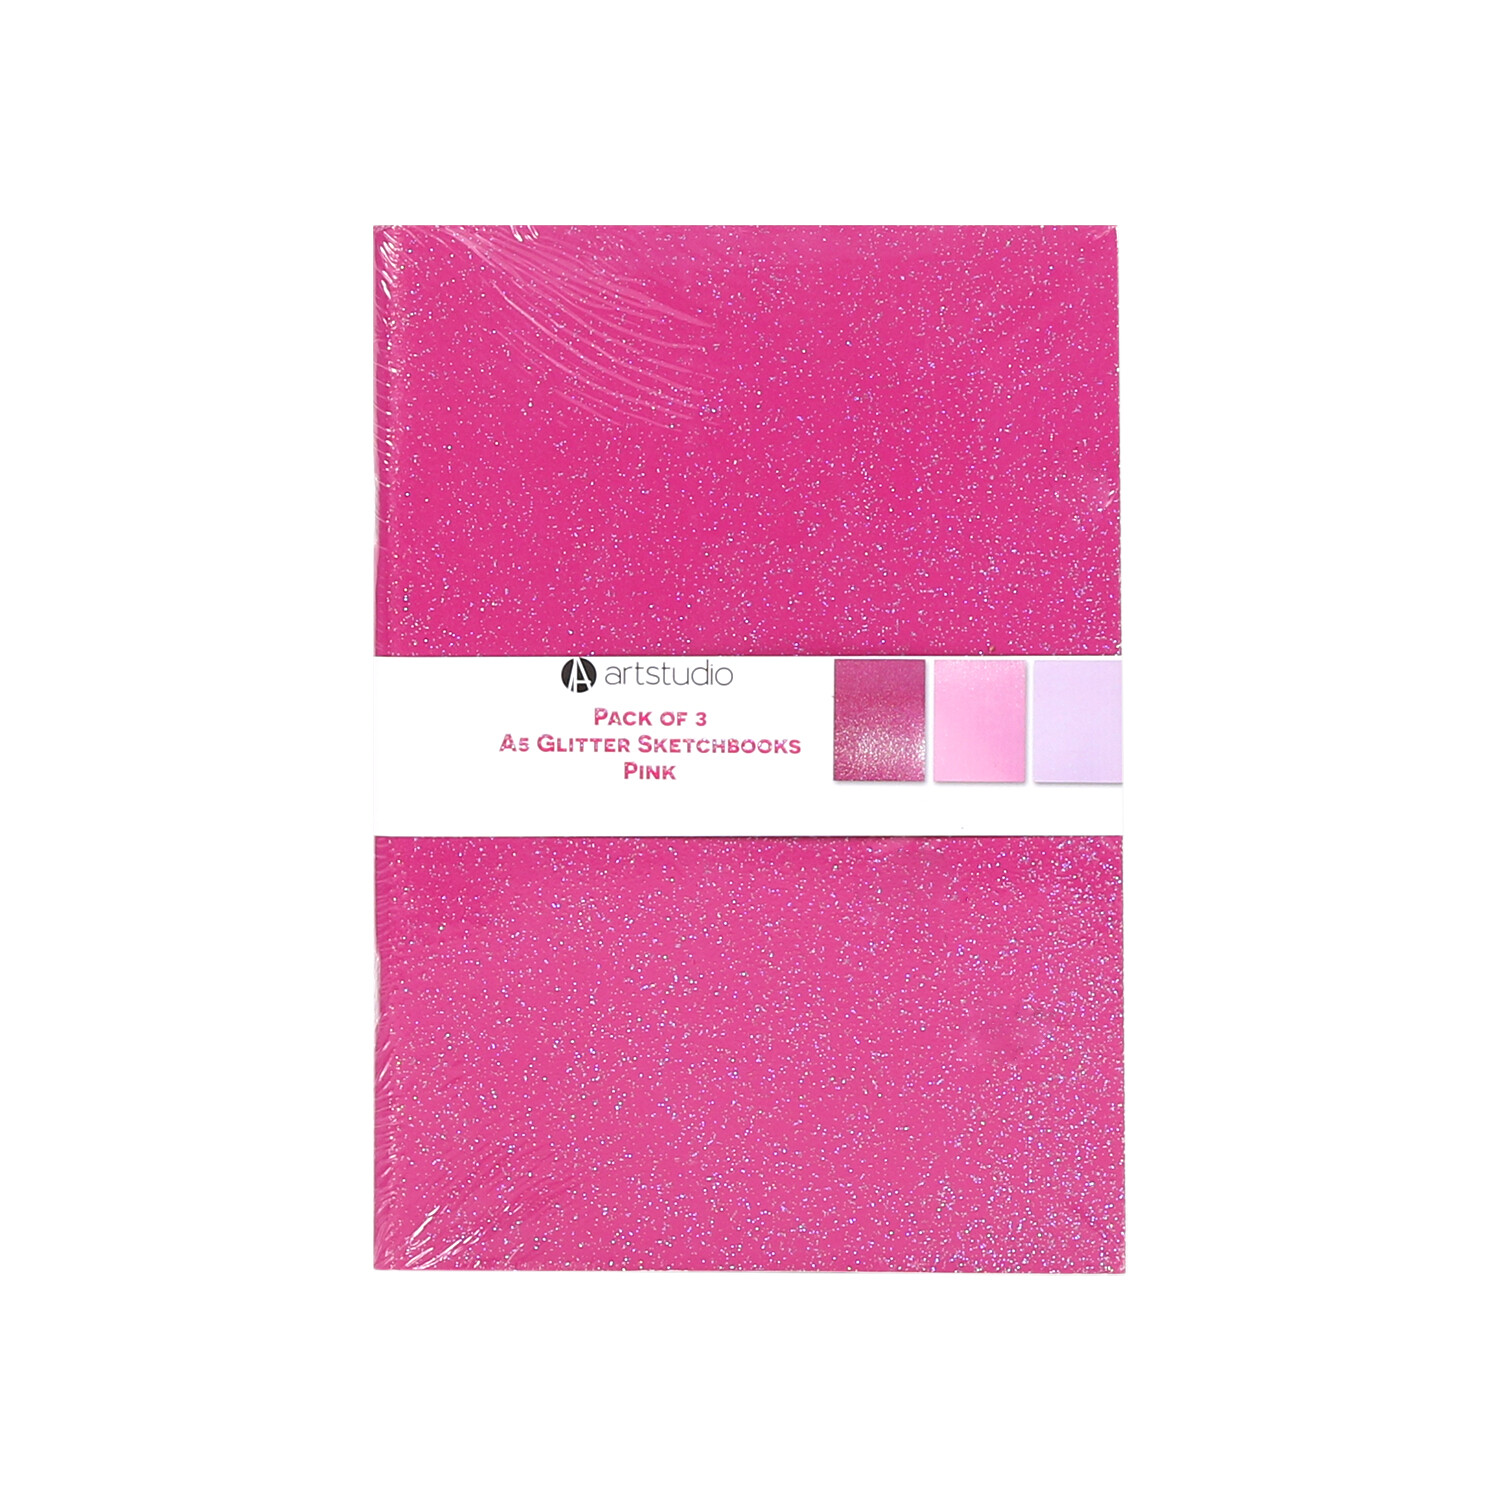 Pack of Three A5 Glitter Sketchbooks - Pink Image